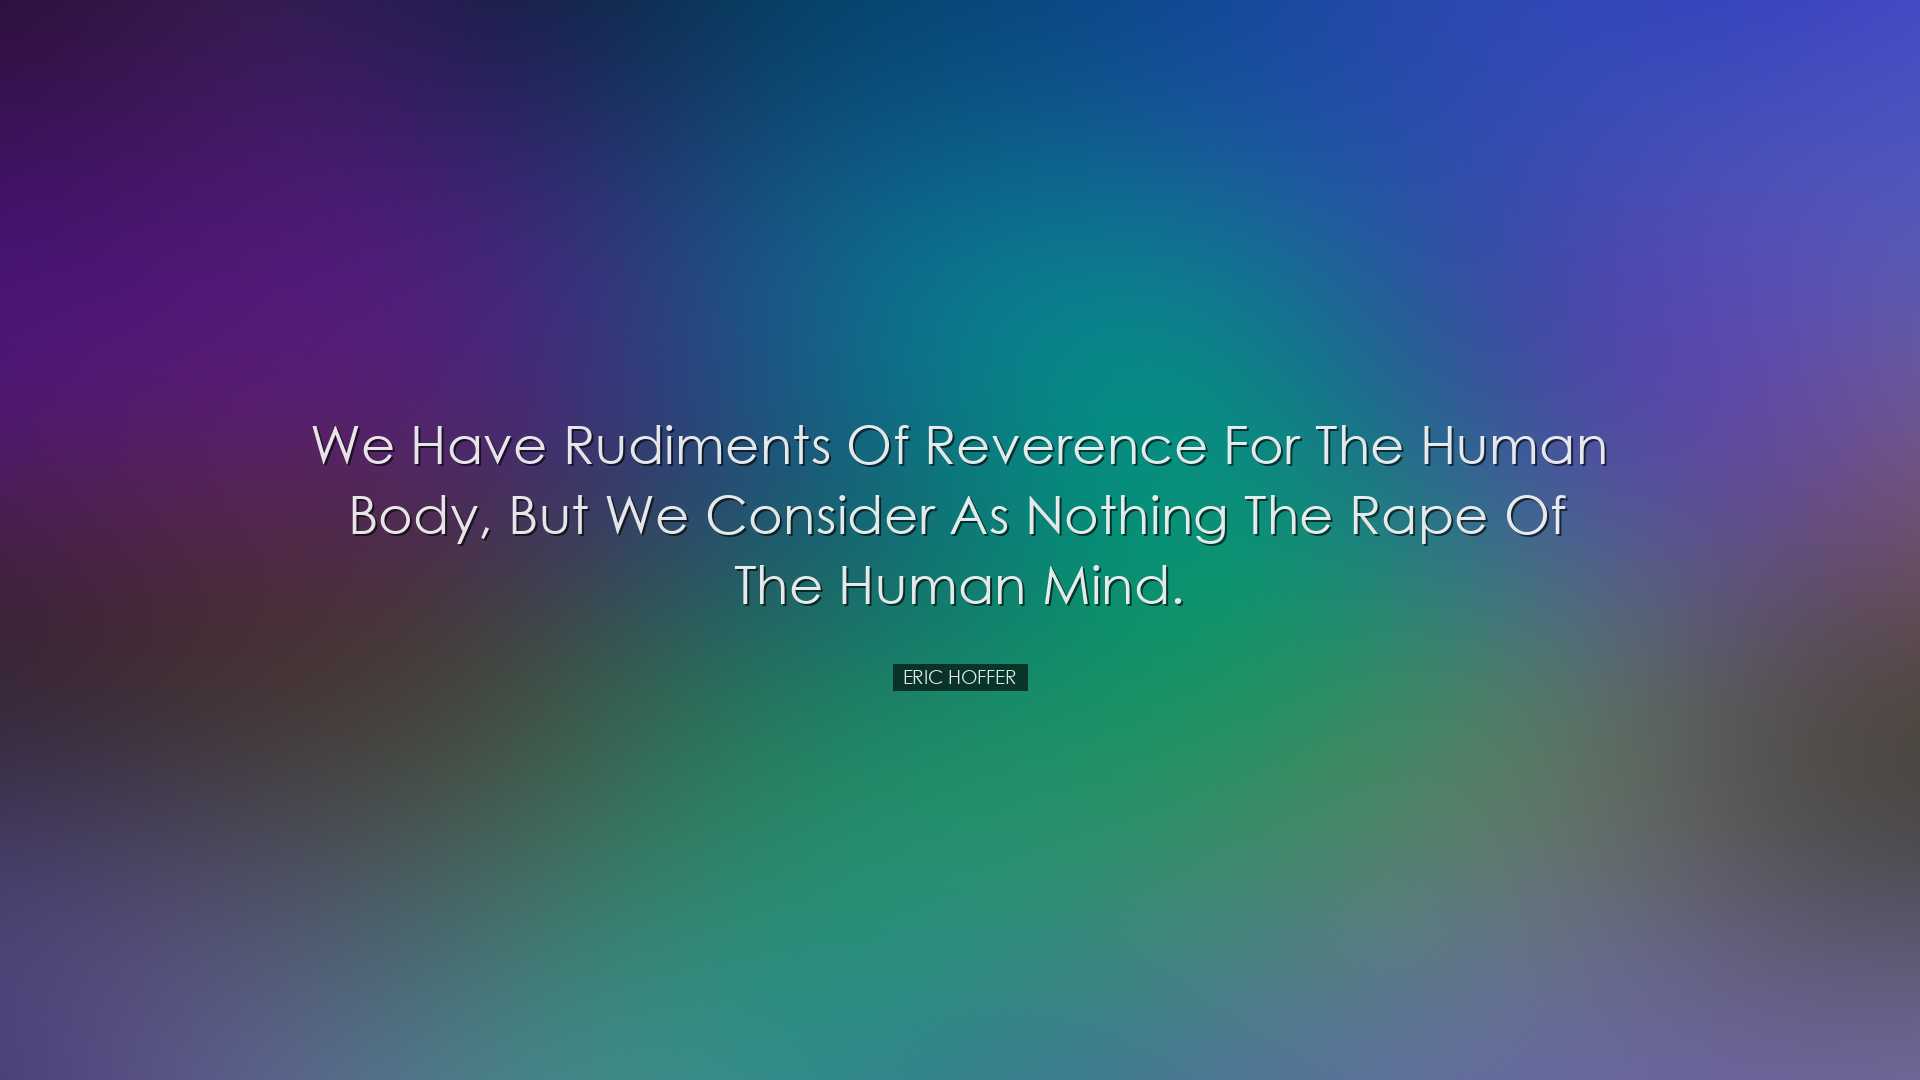 We have rudiments of reverence for the human body, but we consider